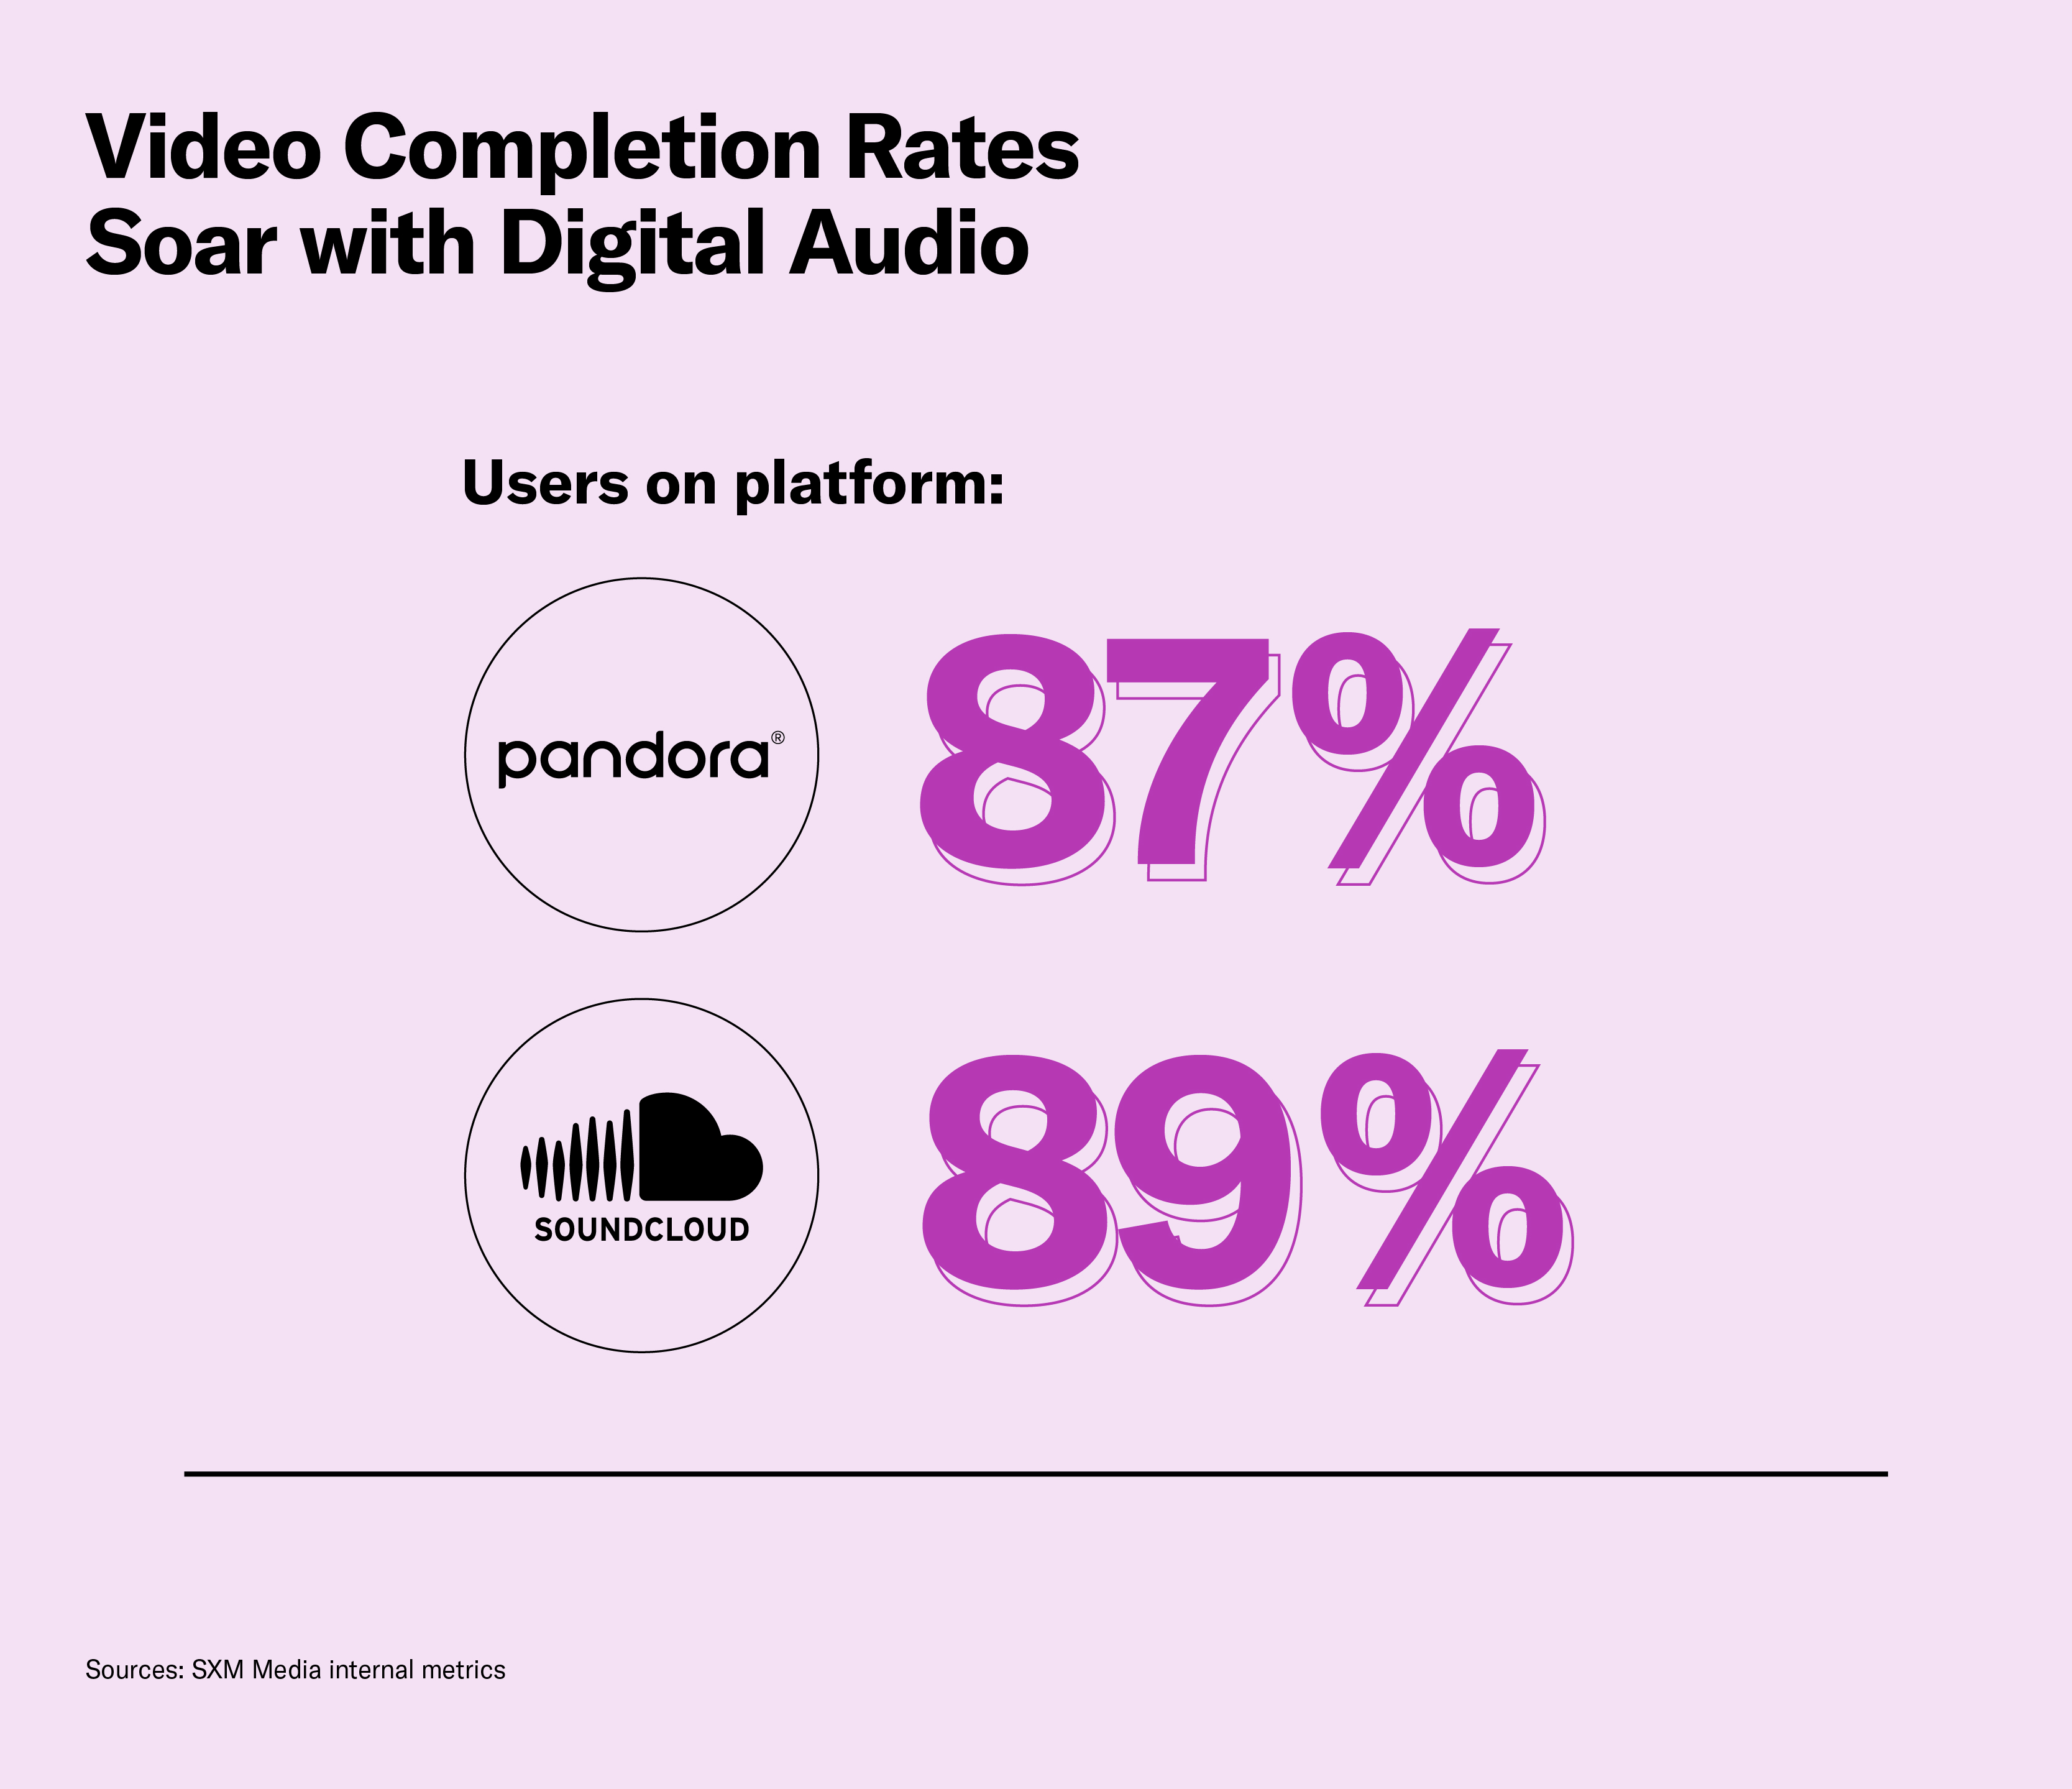 Video ad completion rates are higher with digital audio